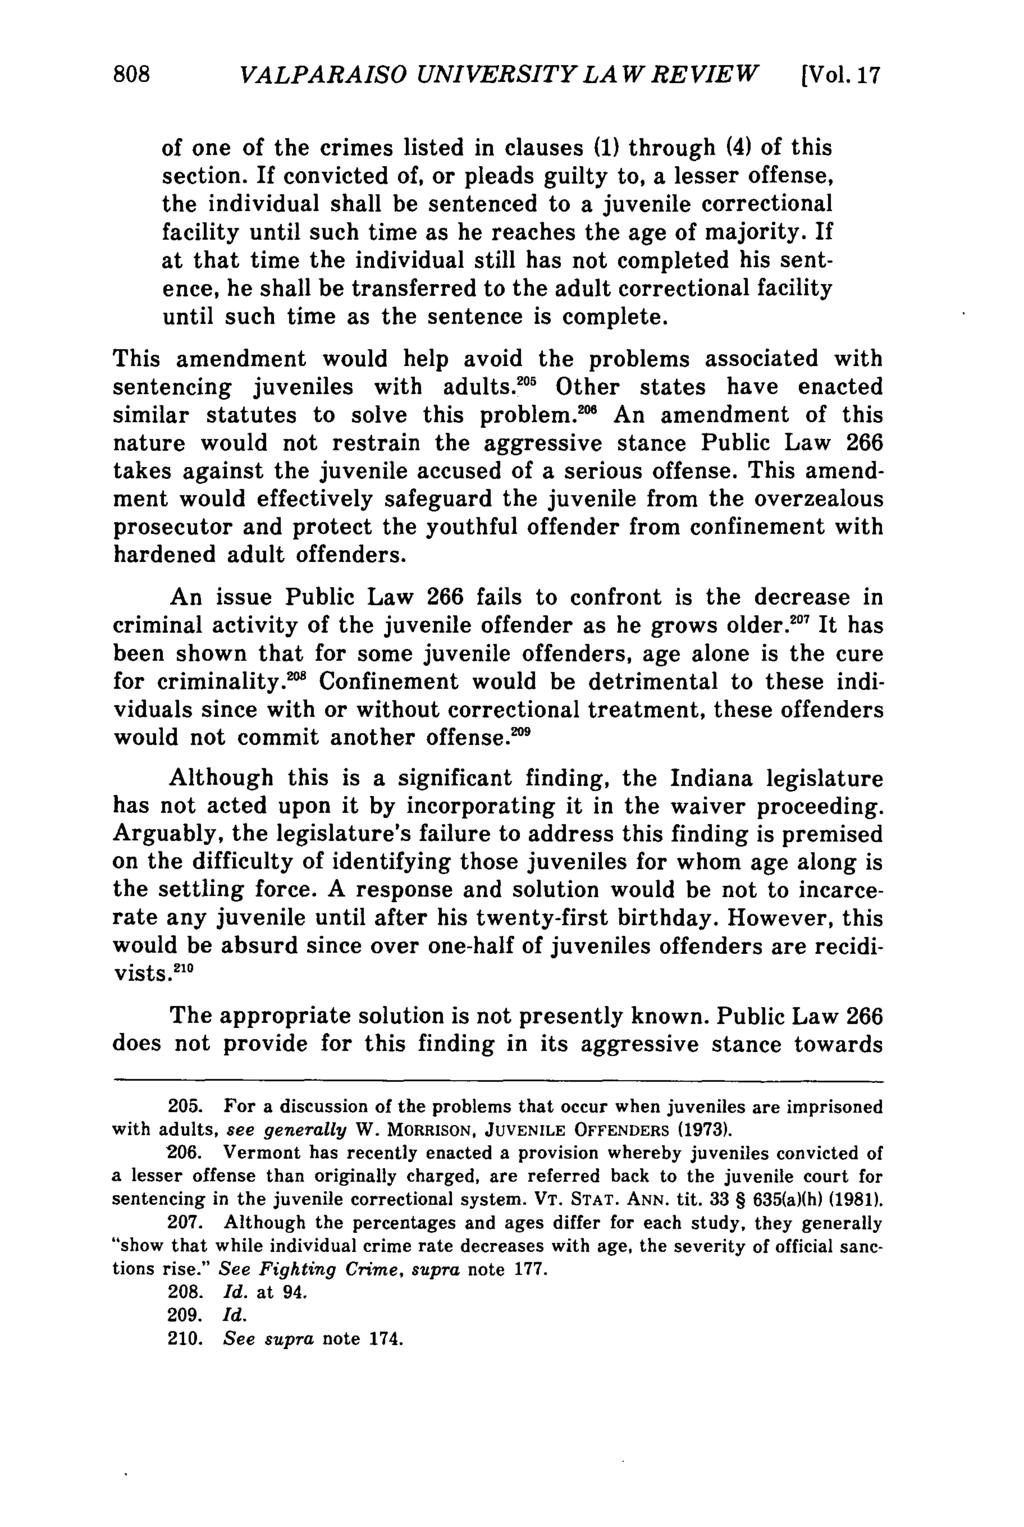 Valparaiso University Law Review, Vol. 17, No. 4 [1983], Art. 9 808 VALPARAISO UNIVERSITYLAWREVIEW [Vol.17 of one of the crimes listed in clauses (1) through (4) of this section.